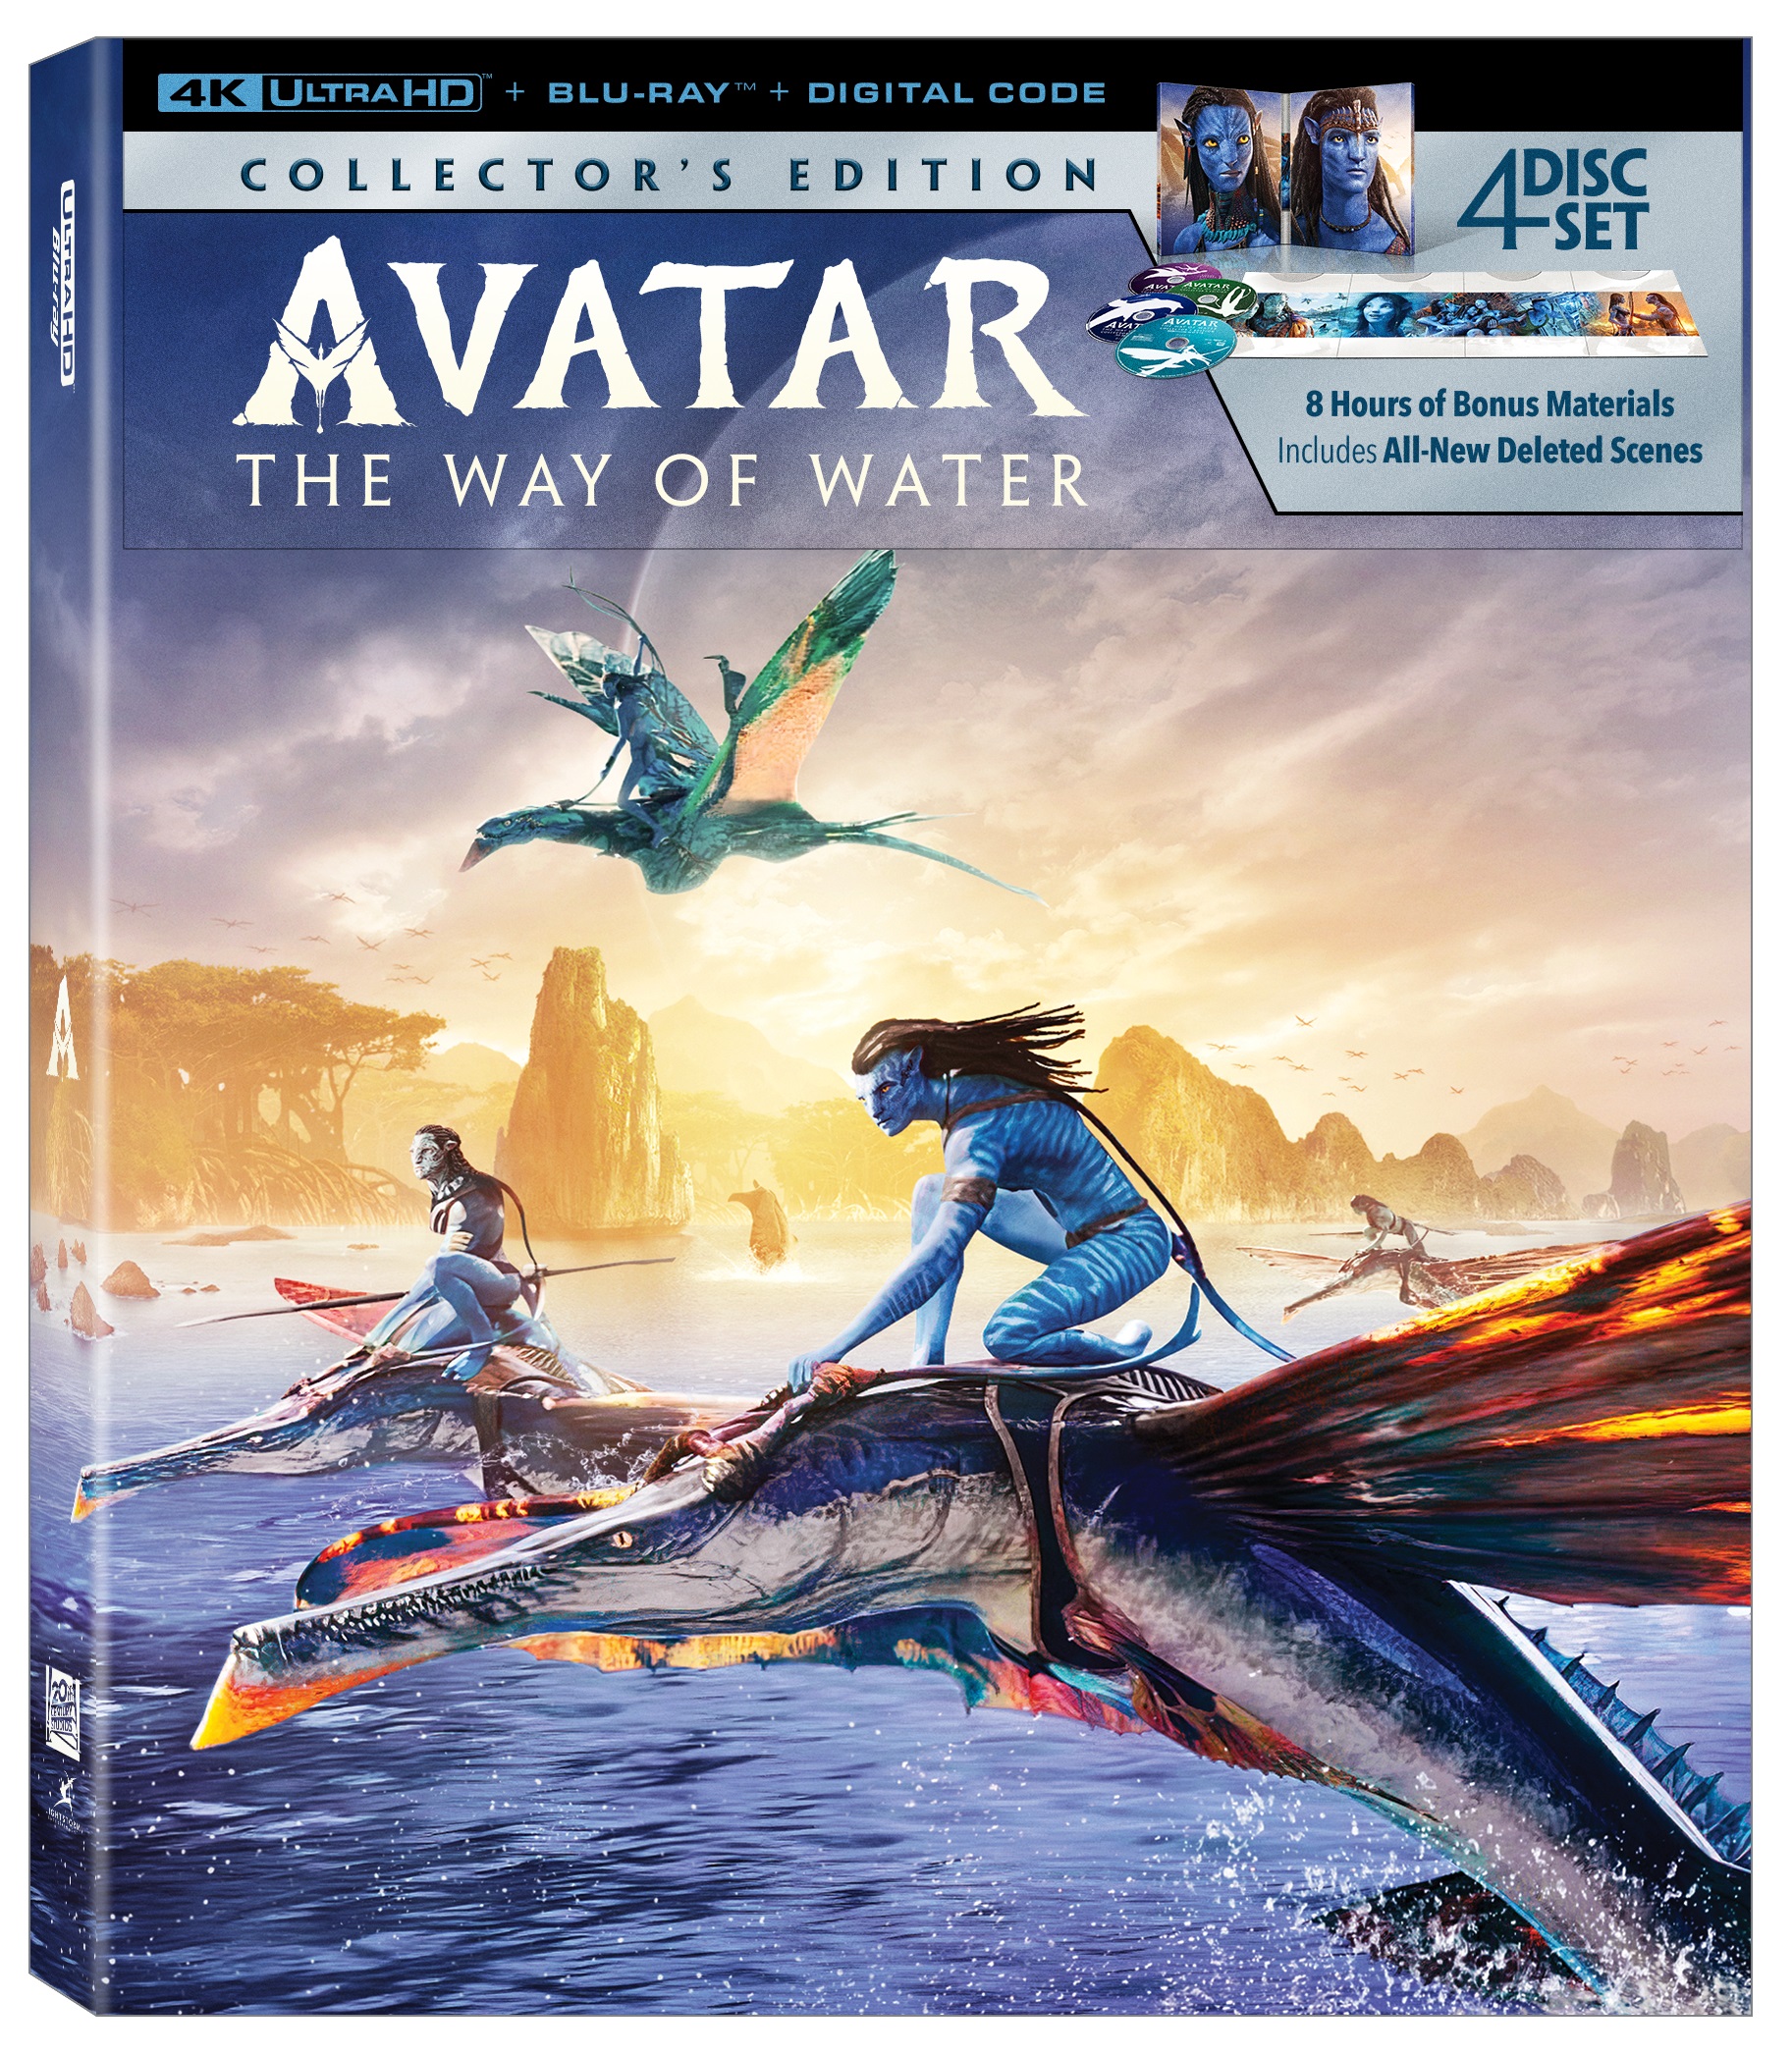 Avatar: The Way of Water 4K Collector's Edition (4K Ultra HD + Blu-ray + Digital Code) (Disney) - image 1 of 3